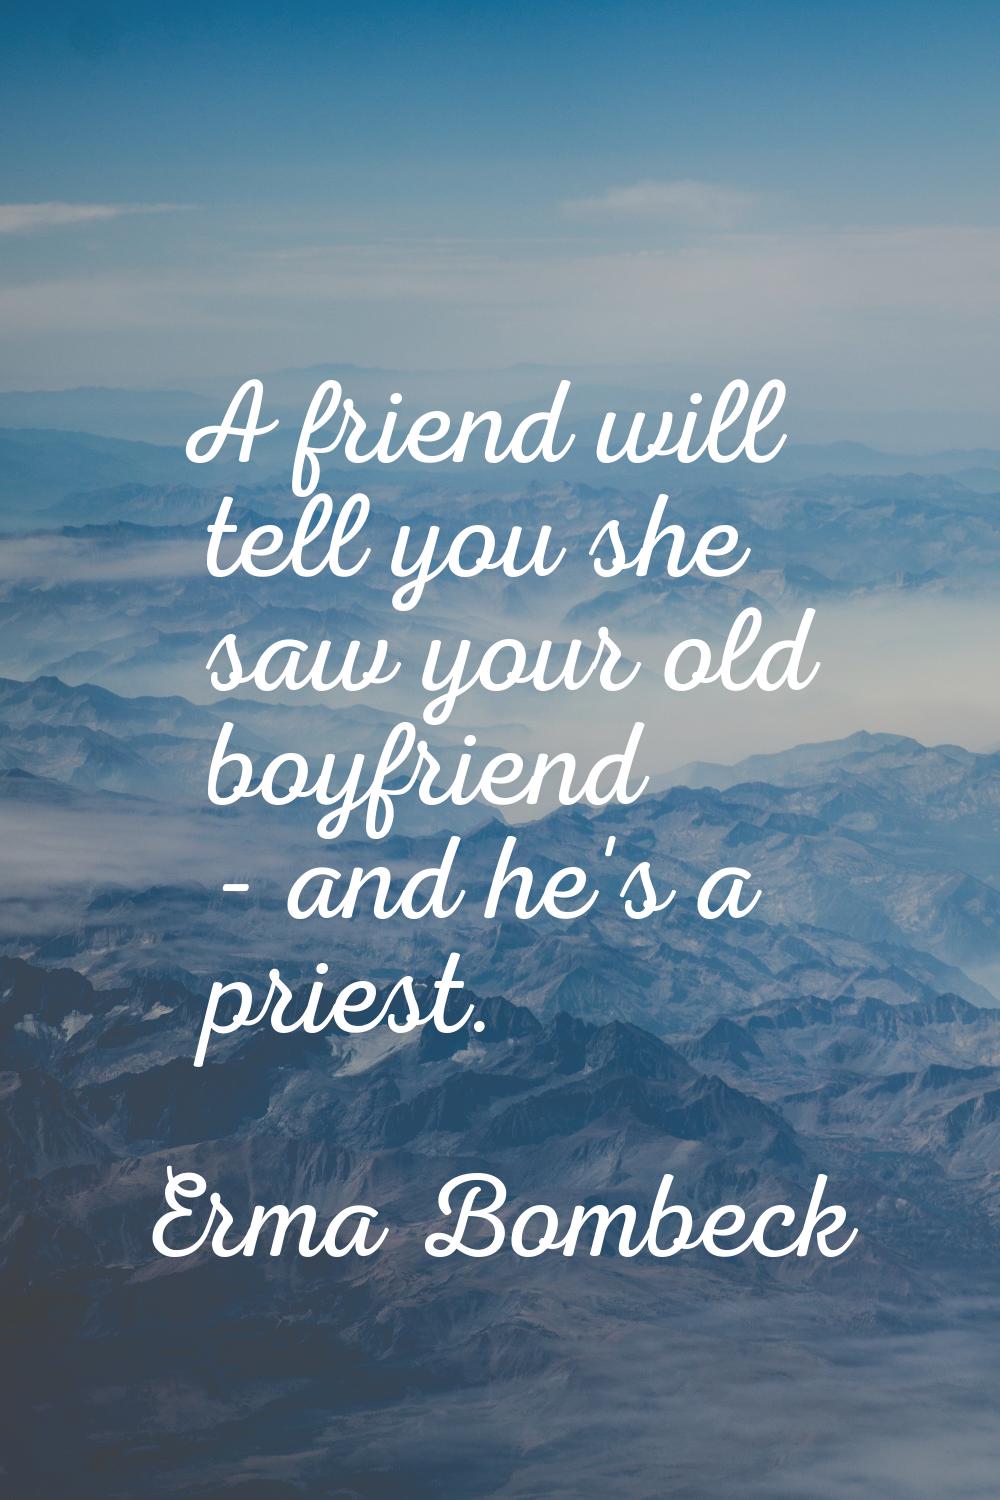 A friend will tell you she saw your old boyfriend - and he's a priest.